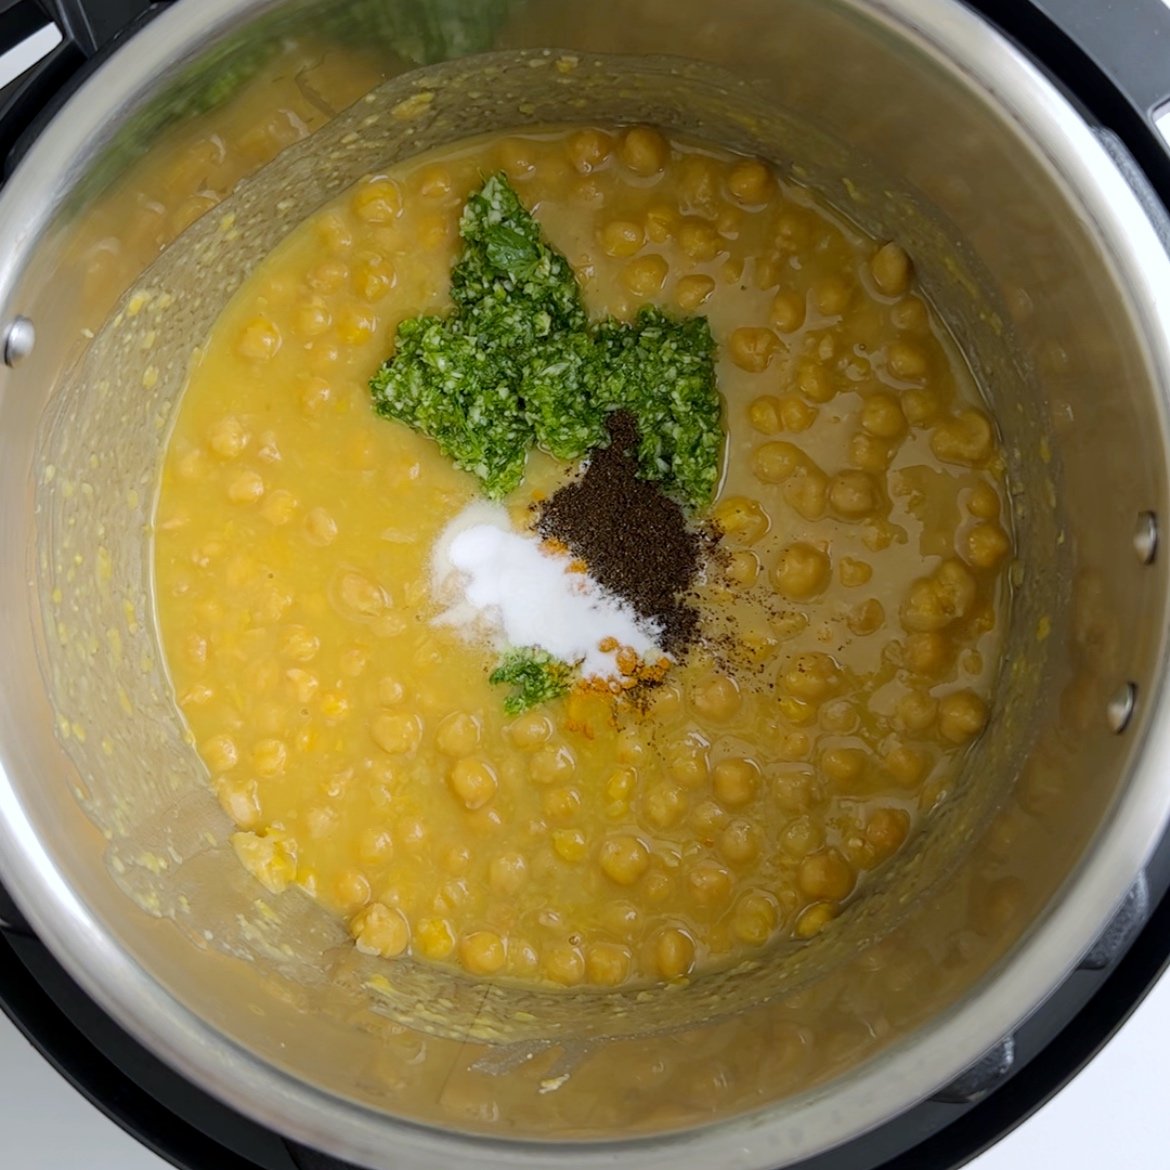 Adding seasoning to the cooked channa and dhal in the instant pot